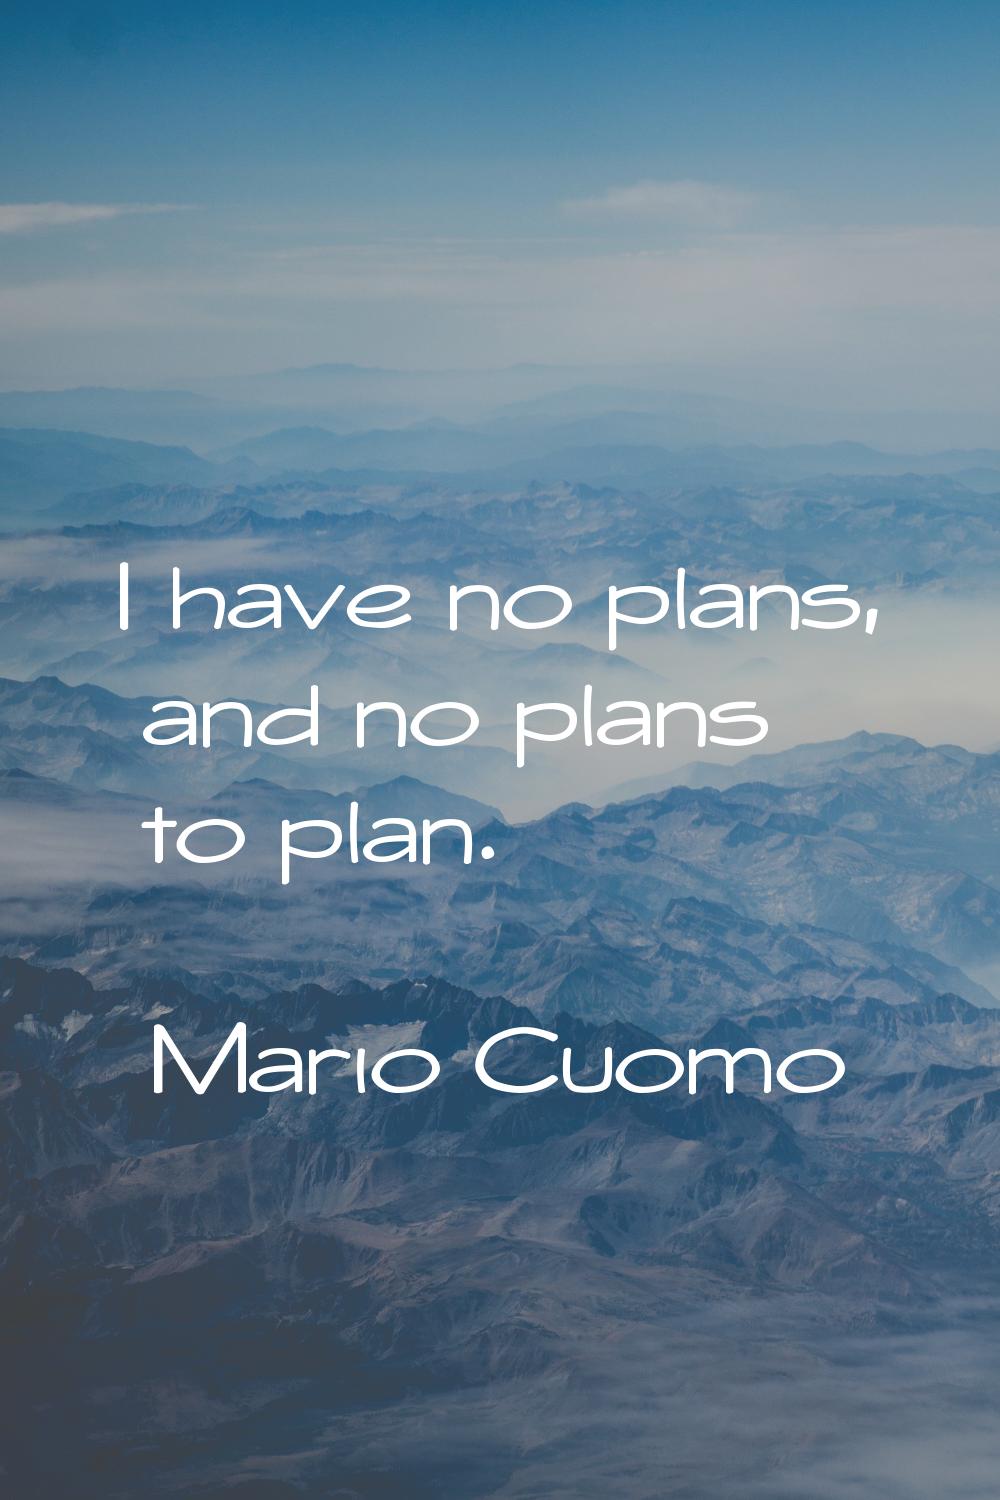 I have no plans, and no plans to plan.